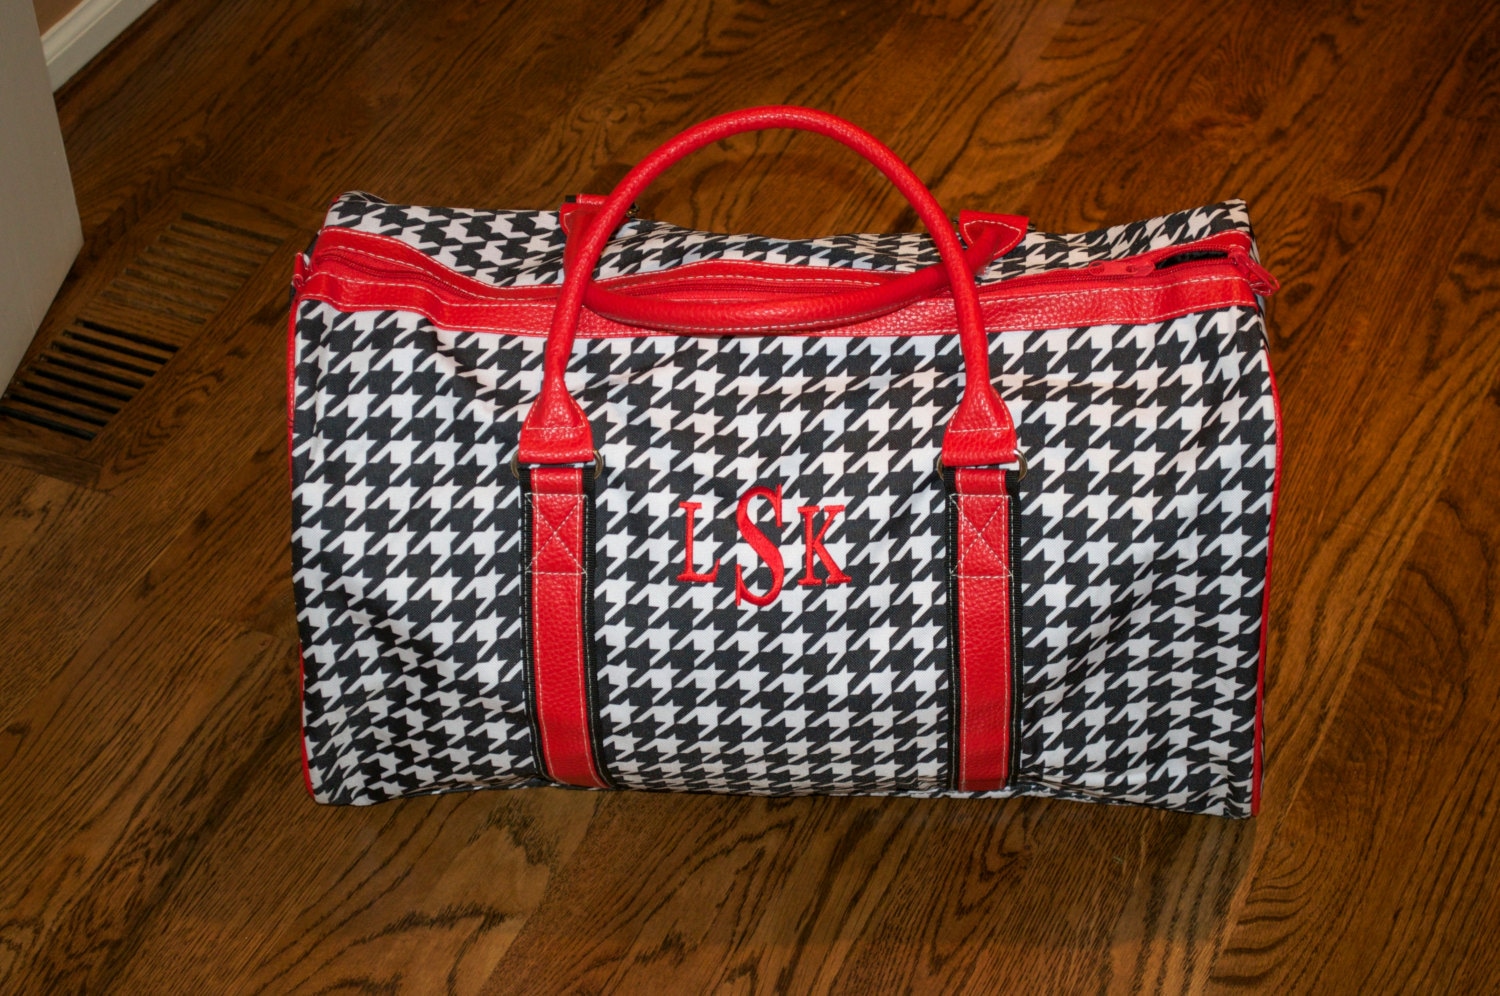 SALE Personalized Houndstooth Duffle Bag by MJMonograms on Etsy